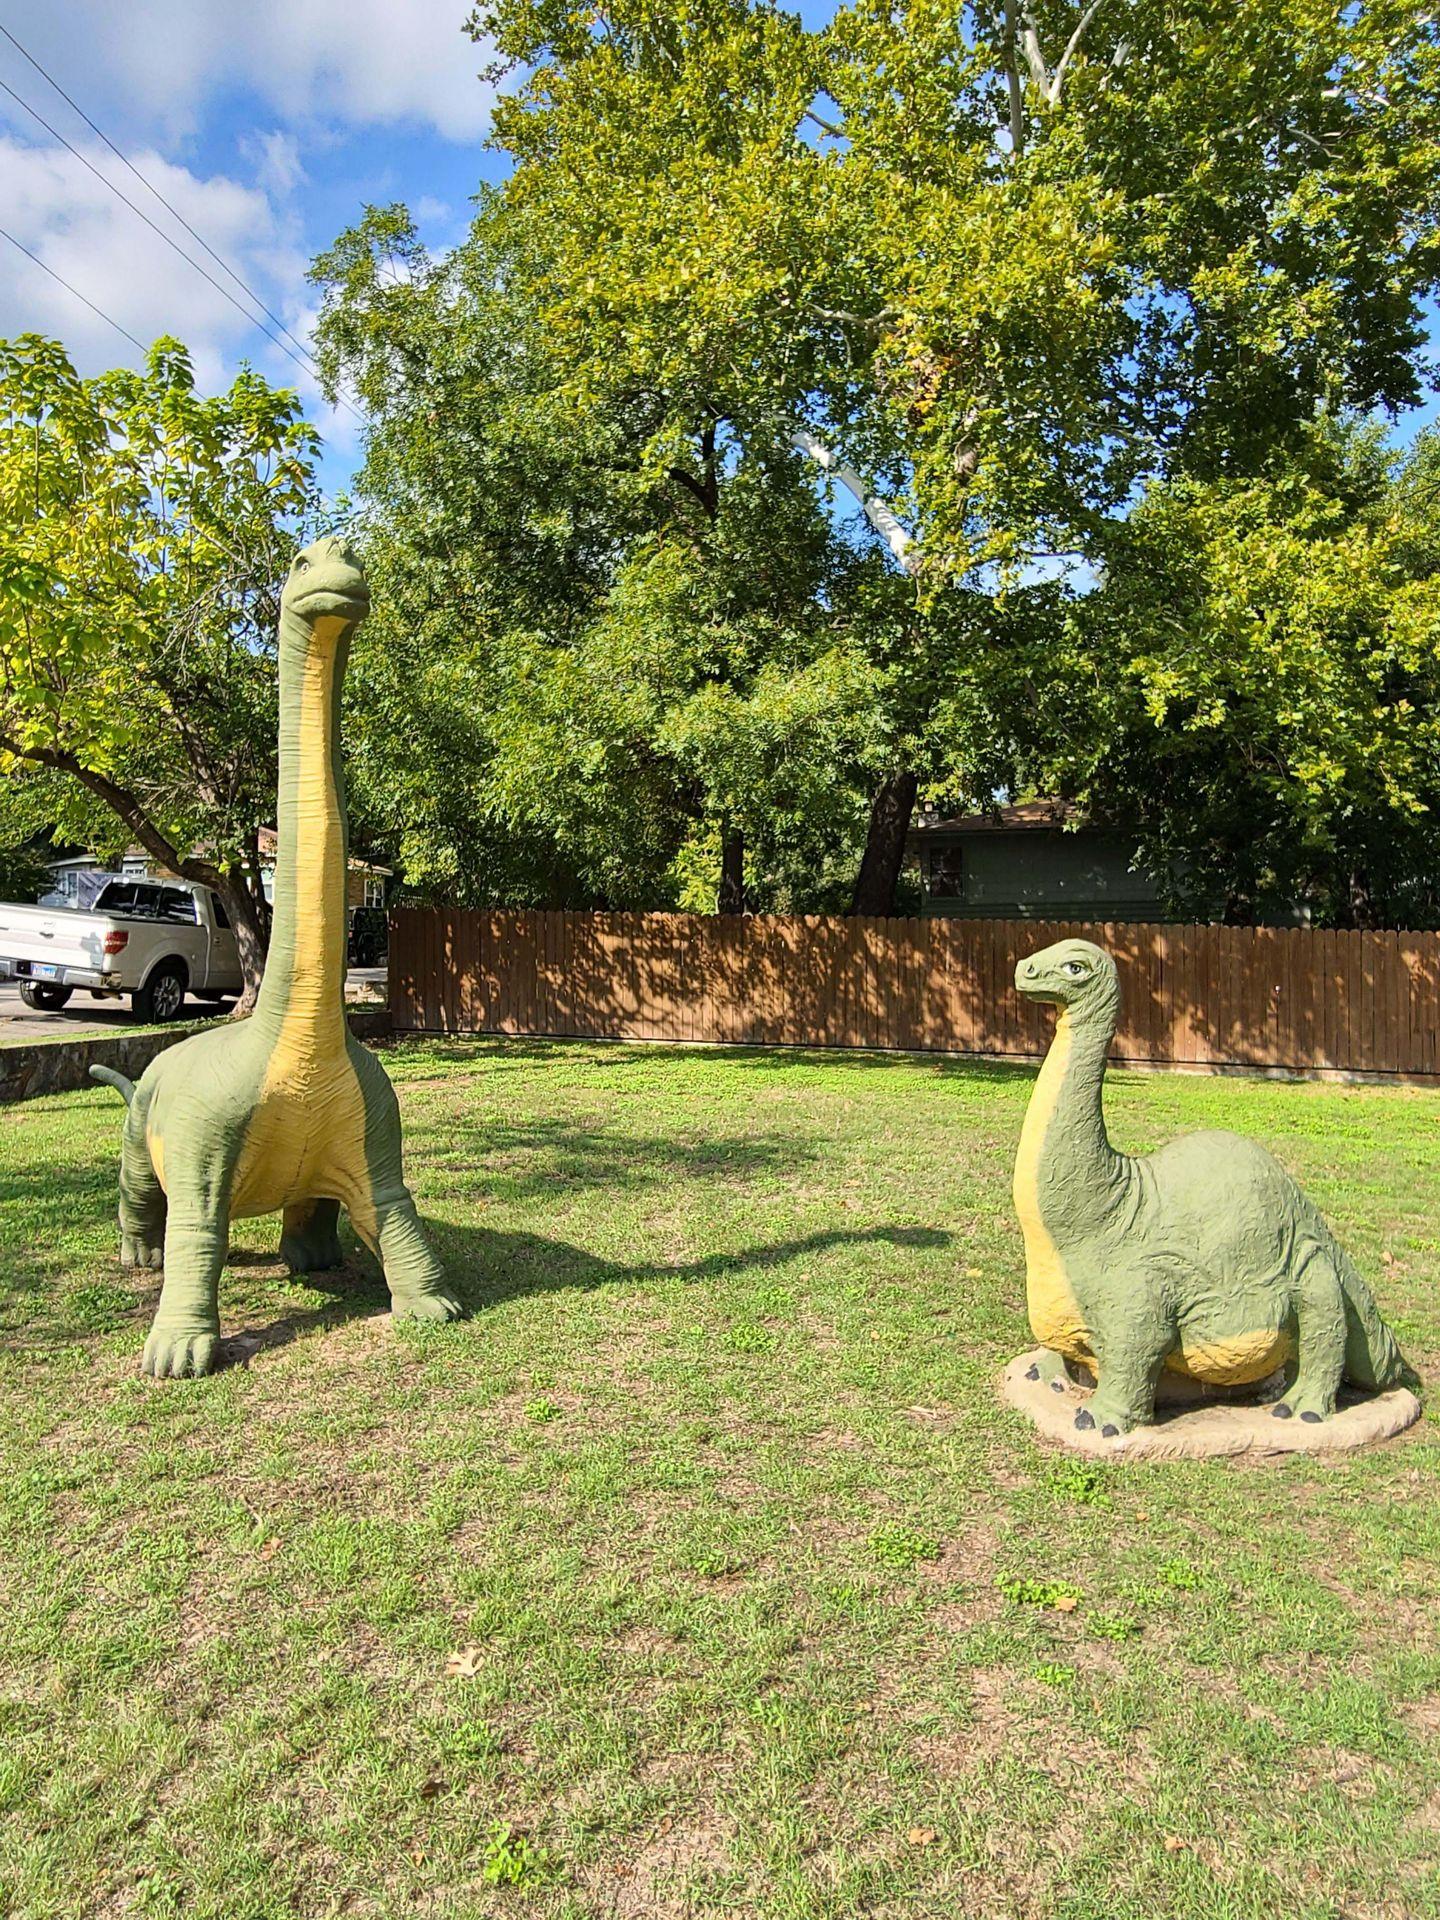 Two green dinosaur statues in the grass in downtown Glen Rose.